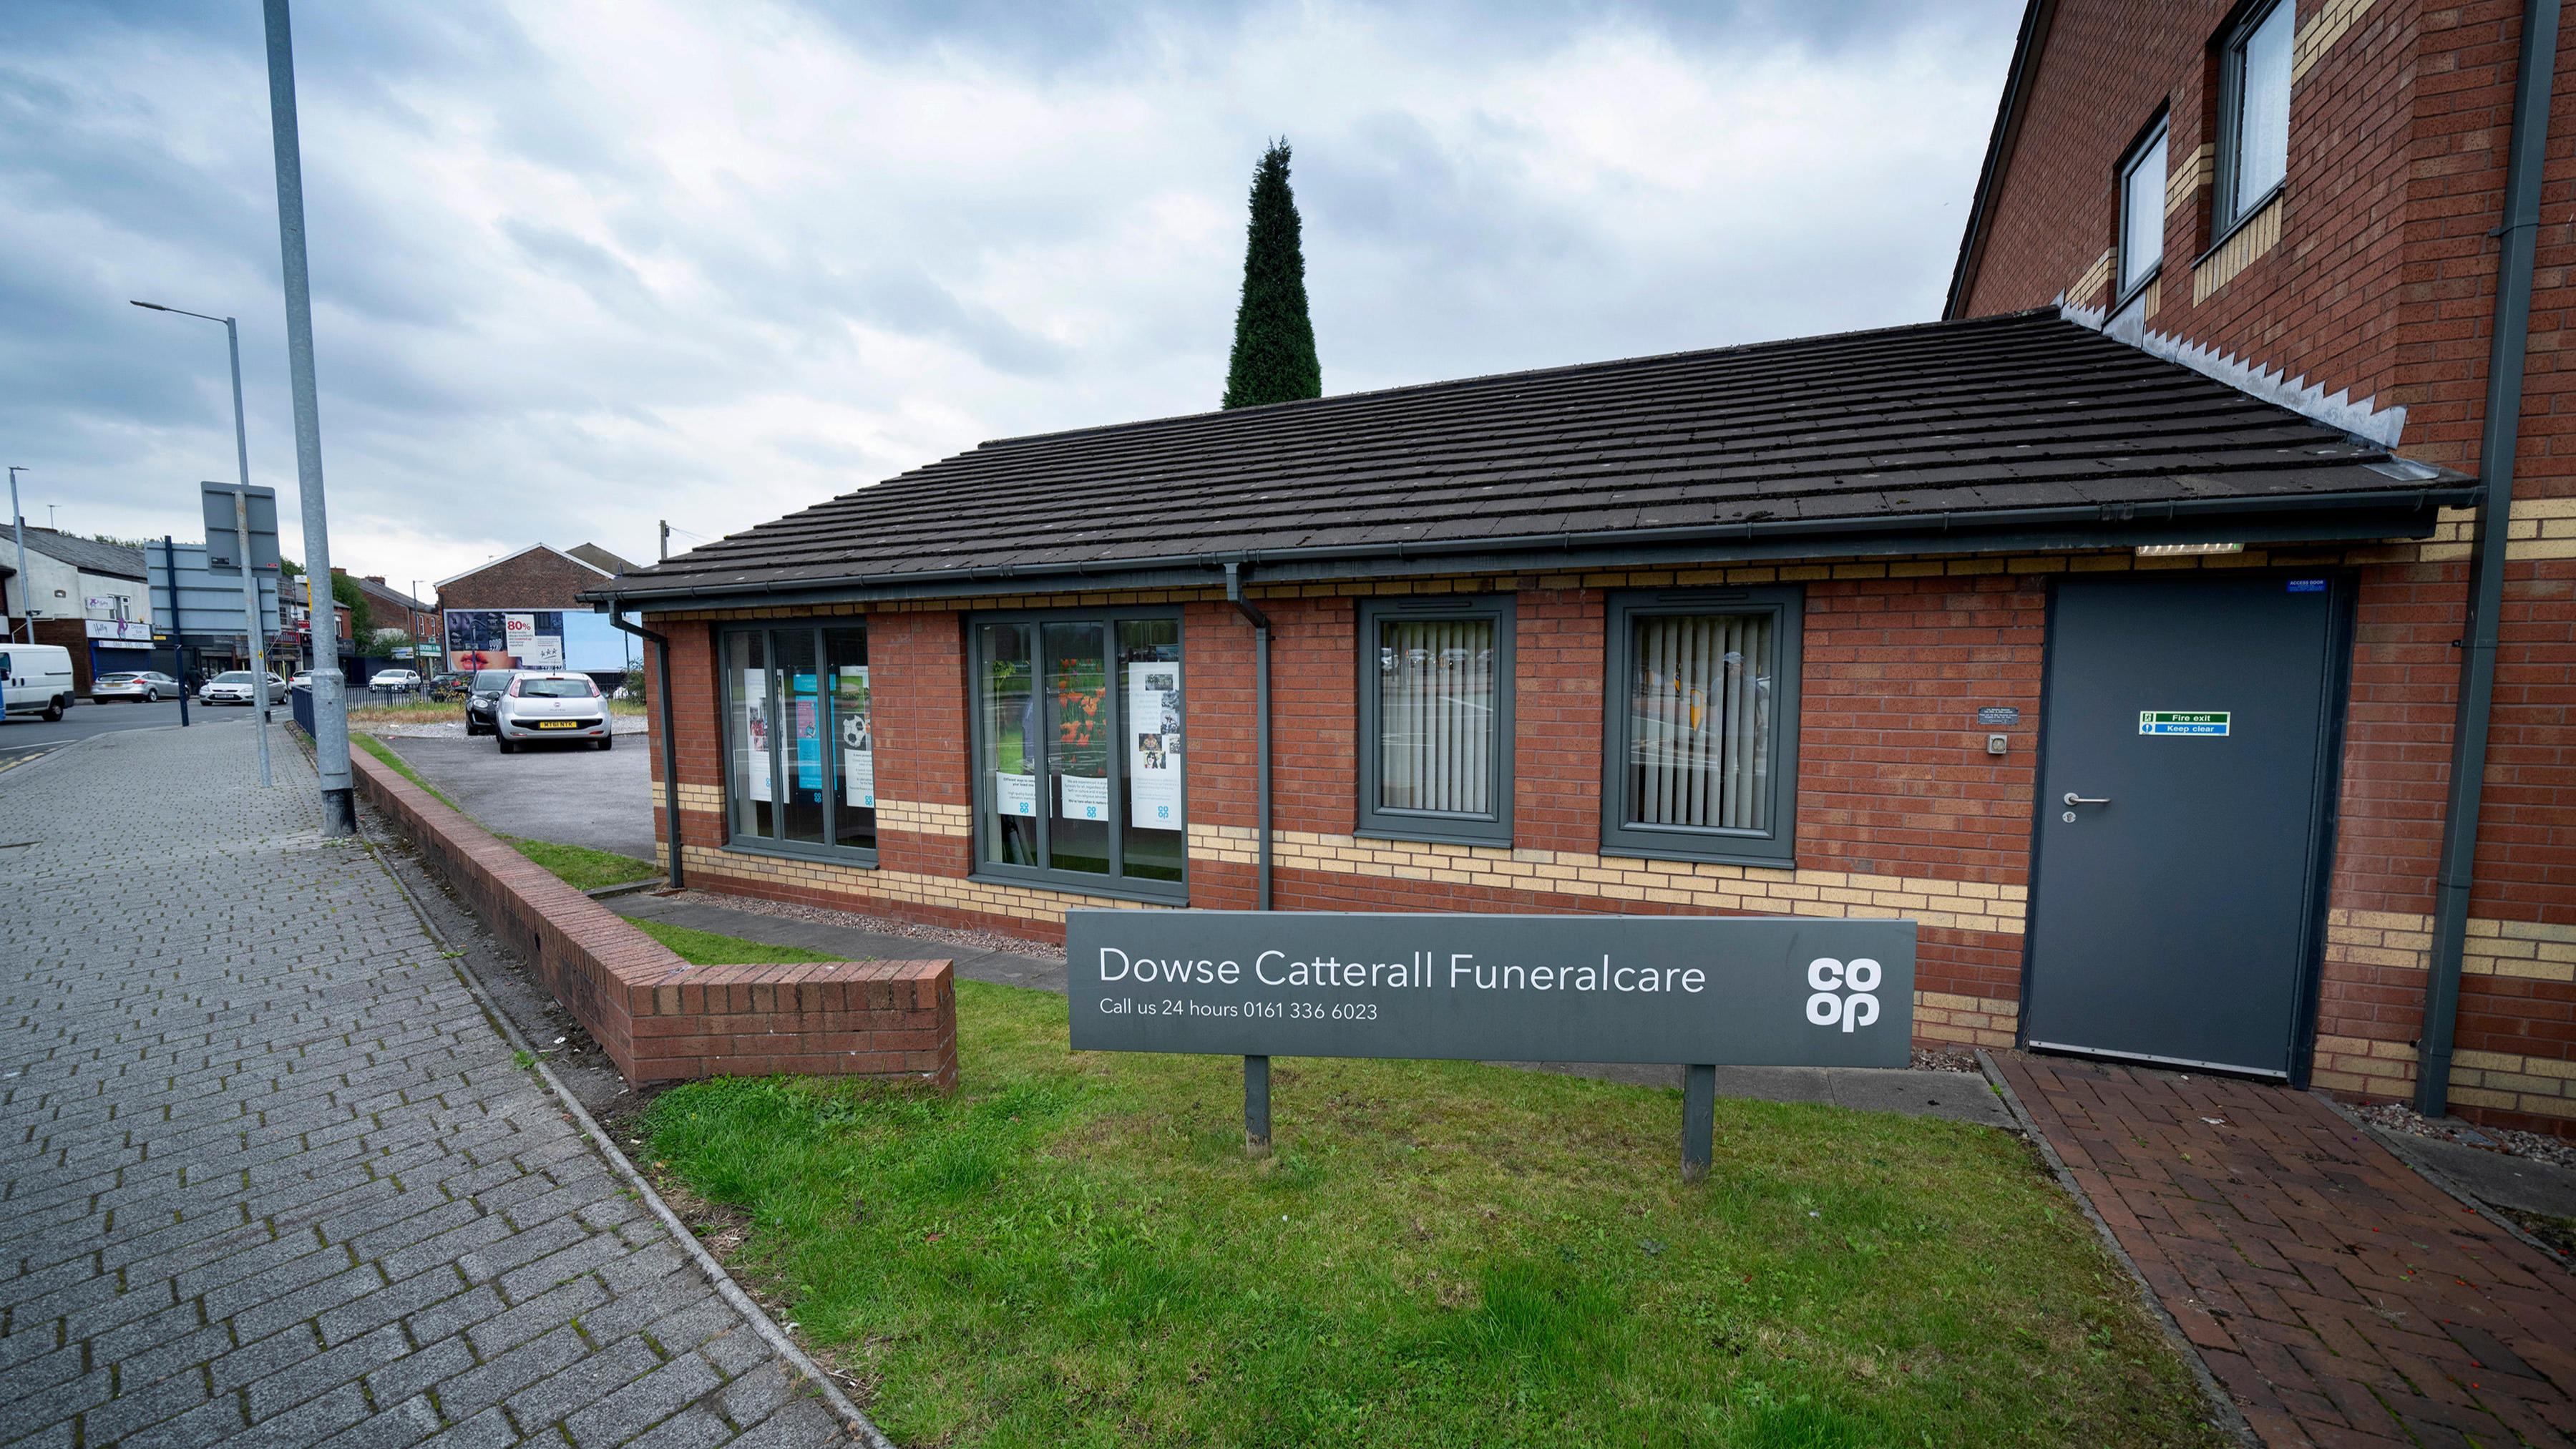 Images Dowse Catterall Funeralcare